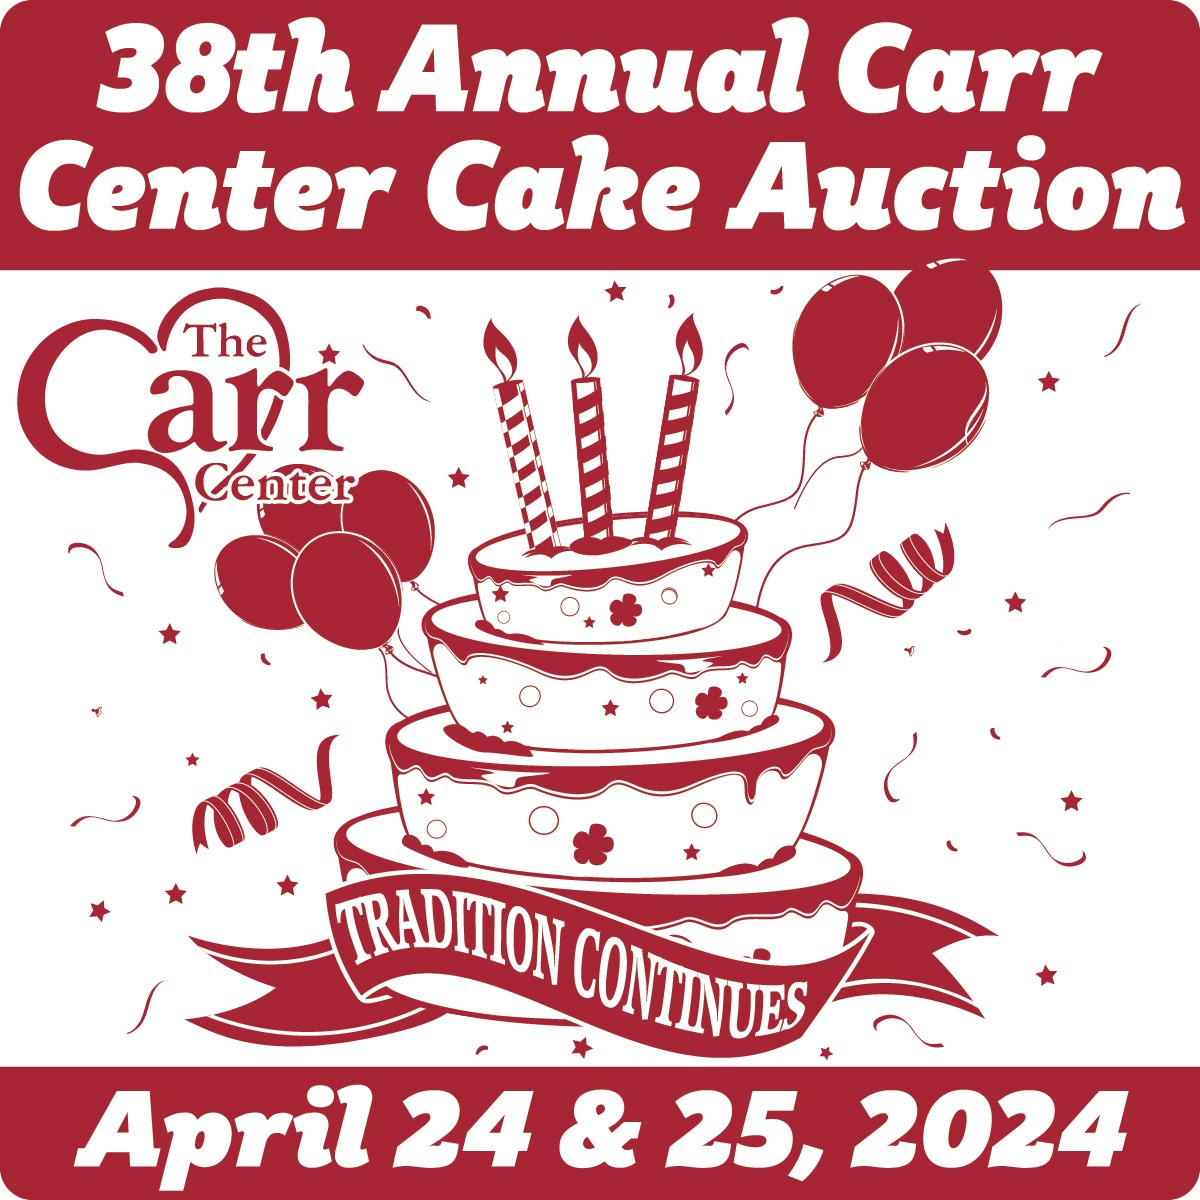 38th Annual Carr Center Cake Auction ad